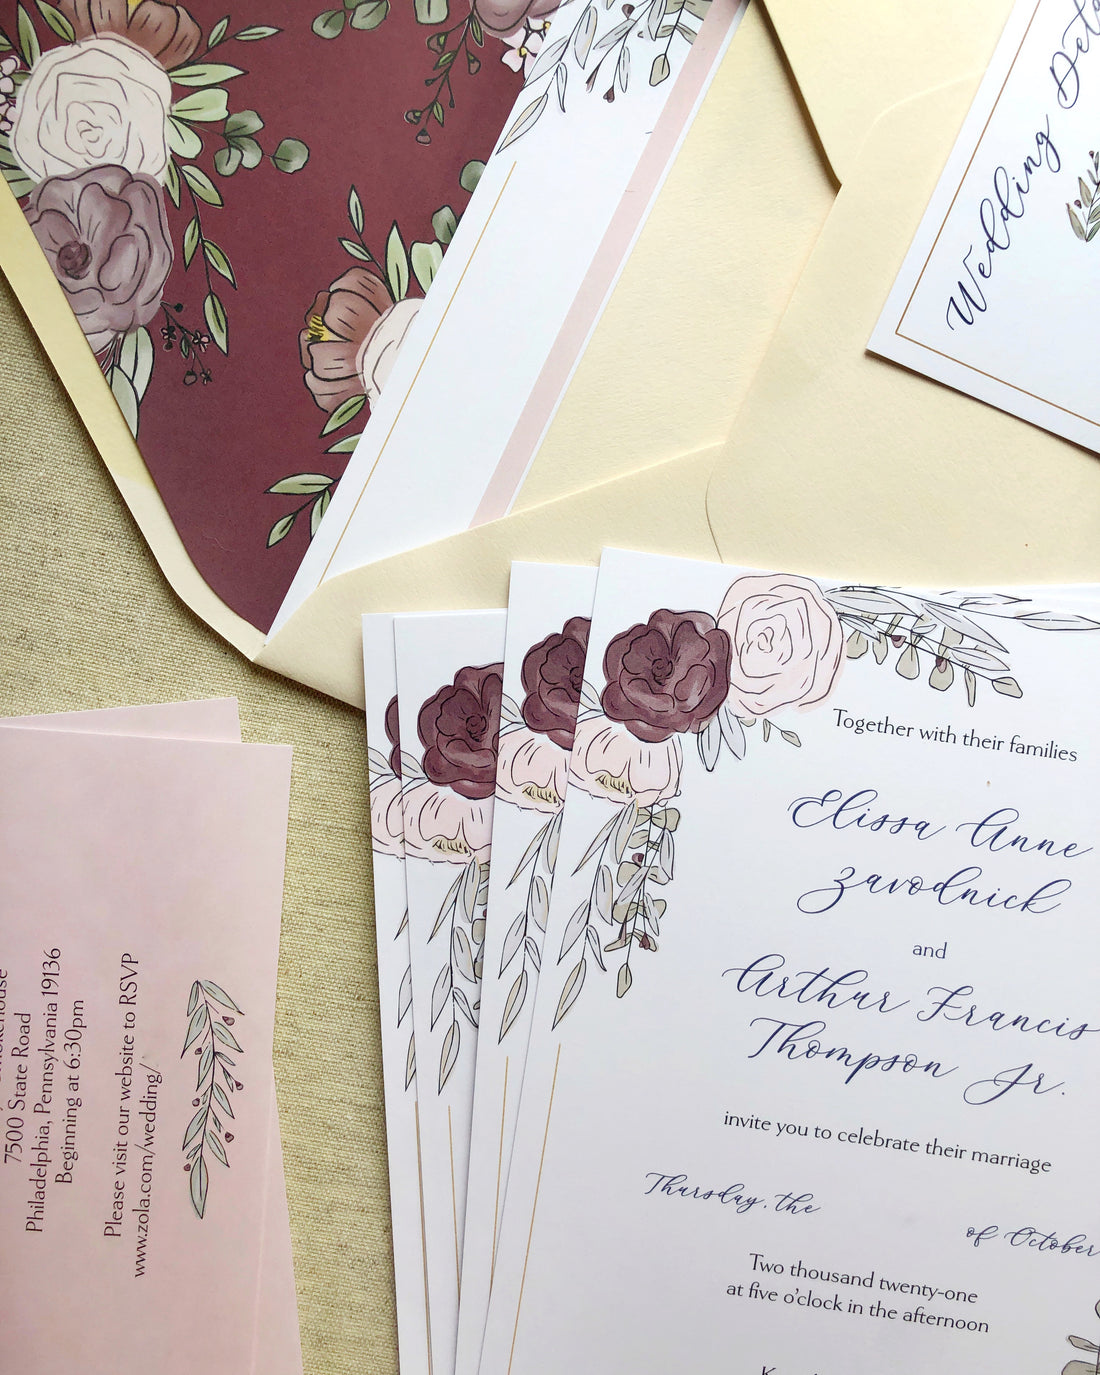 When Should I Send Out My Wedding Invites?